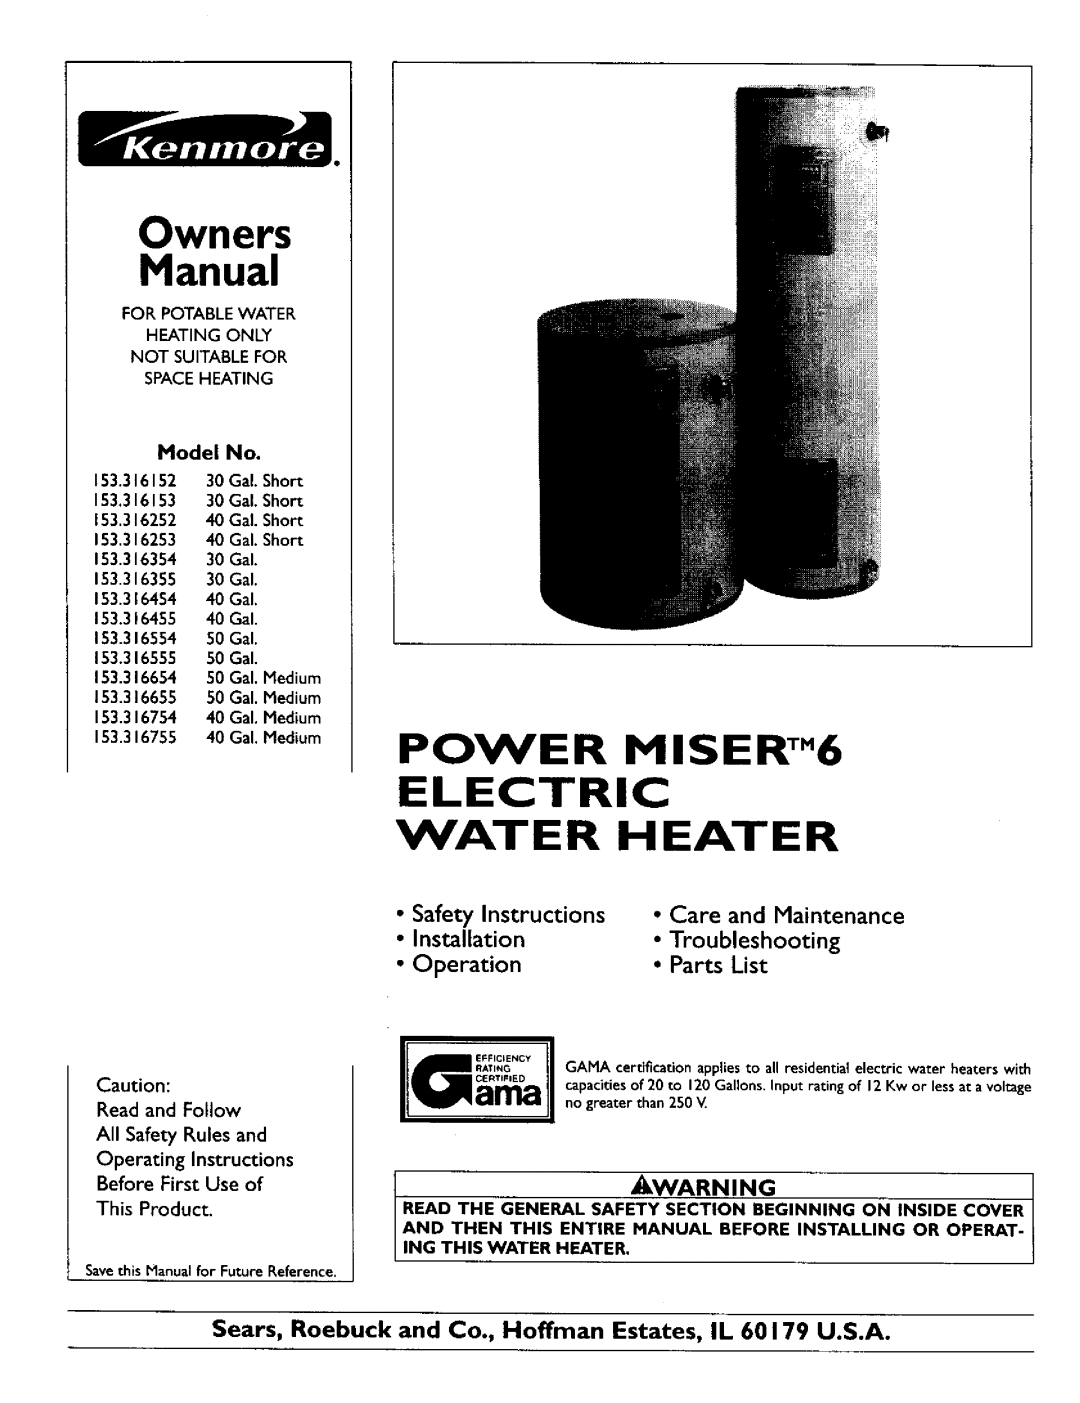 Kenmore 153.316555 owner manual Owners, Manual, POWER MISERrM6 ELECTRIC WATER HEATER, Troubleshooting, Parts List 